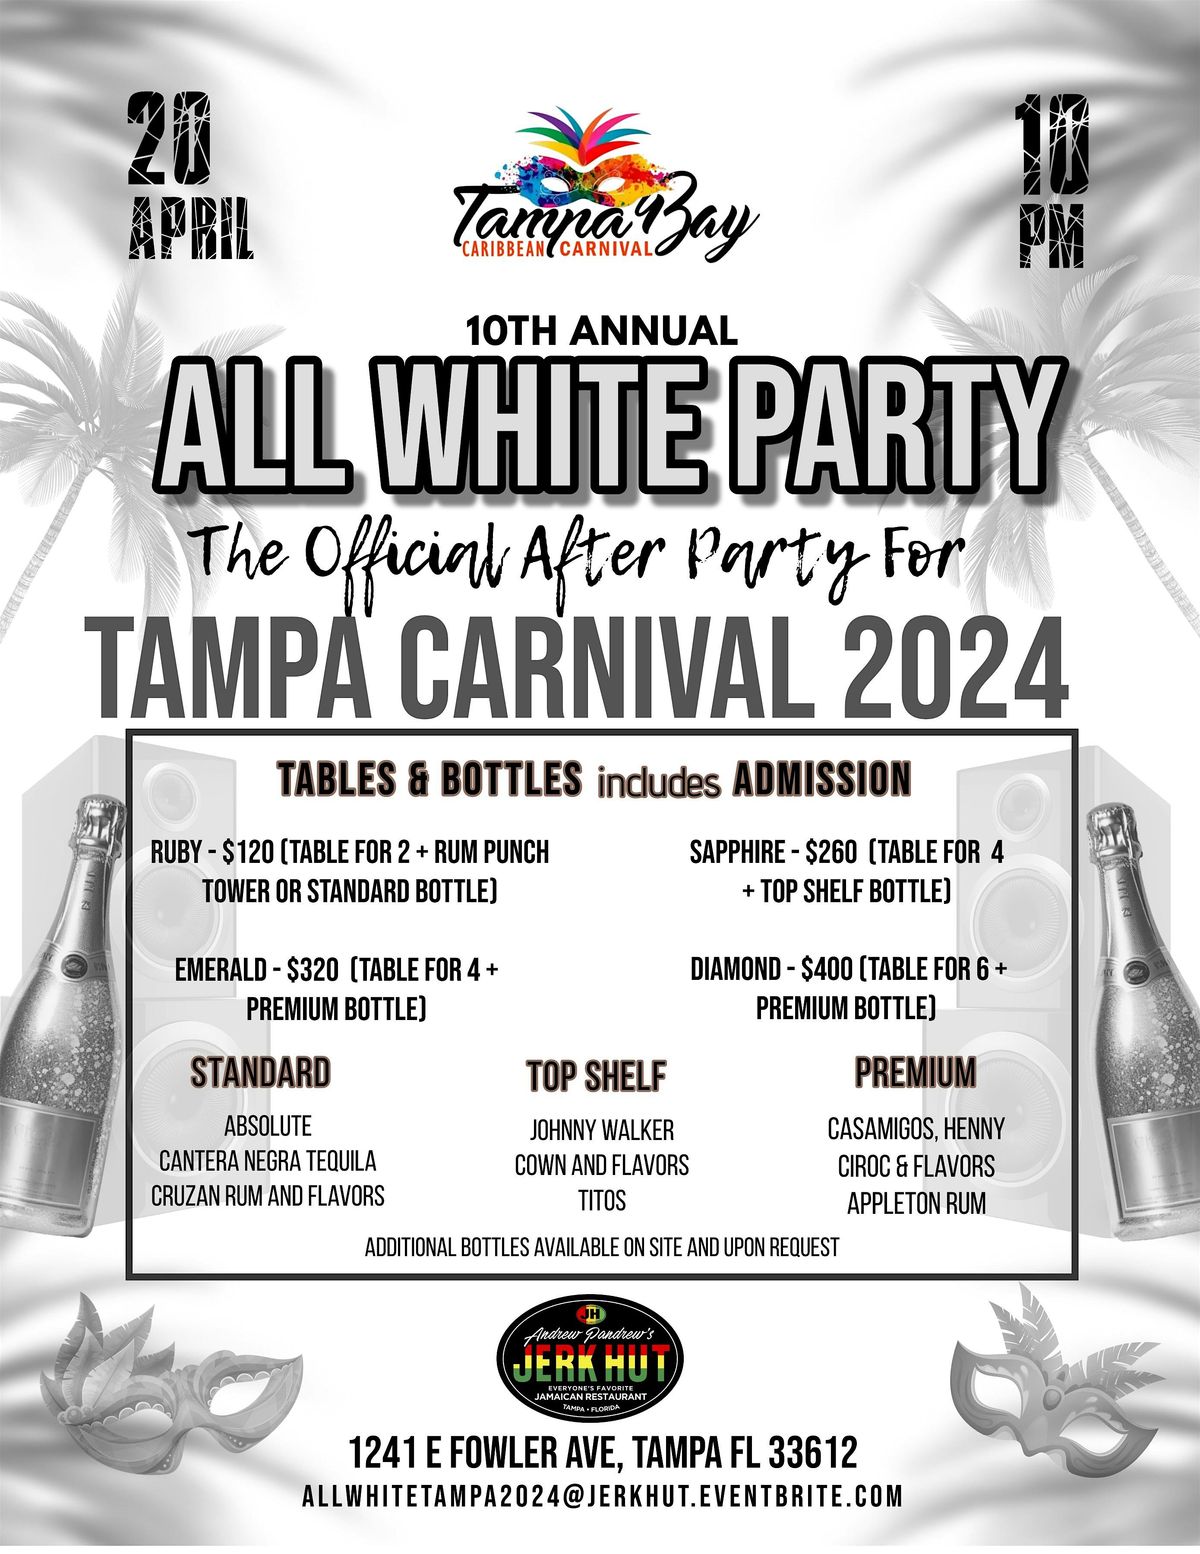 ALL WHITE PARTY - The Official After Party for TAMPA CARNIVAL 2024